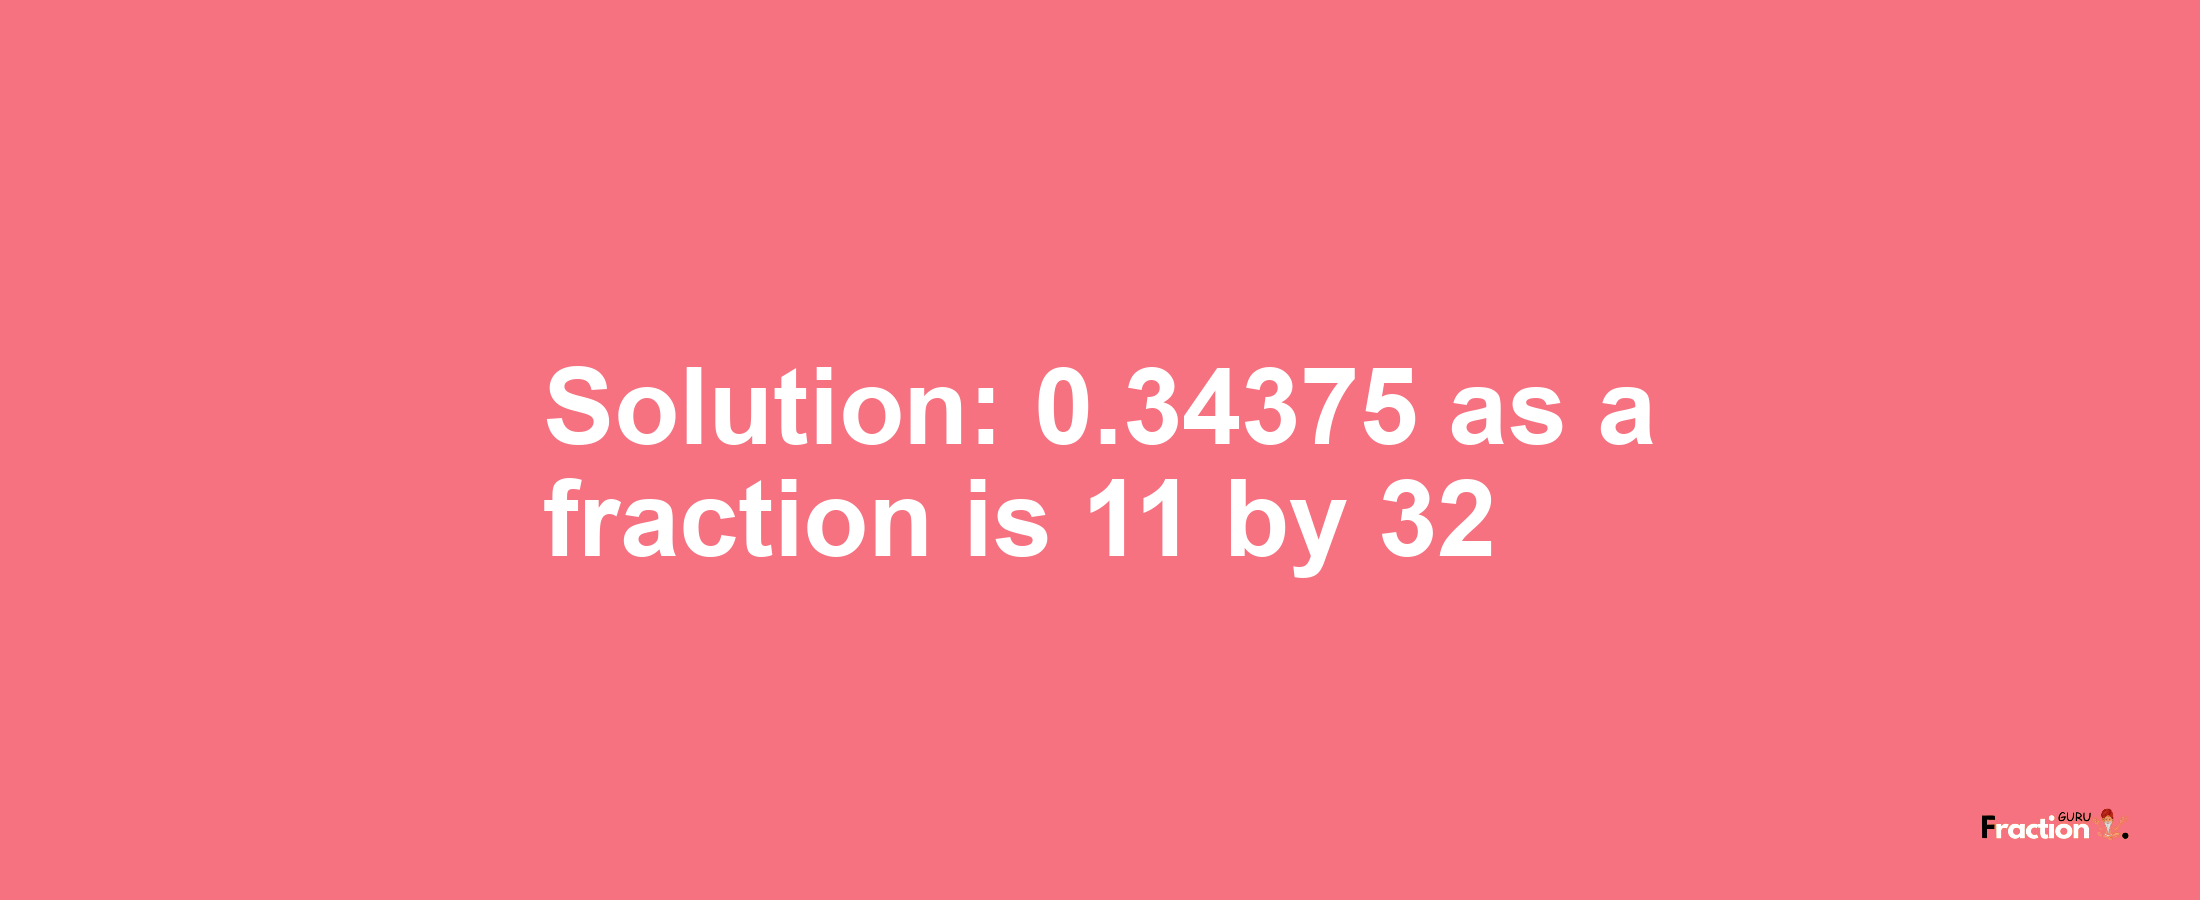 Solution:0.34375 as a fraction is 11/32